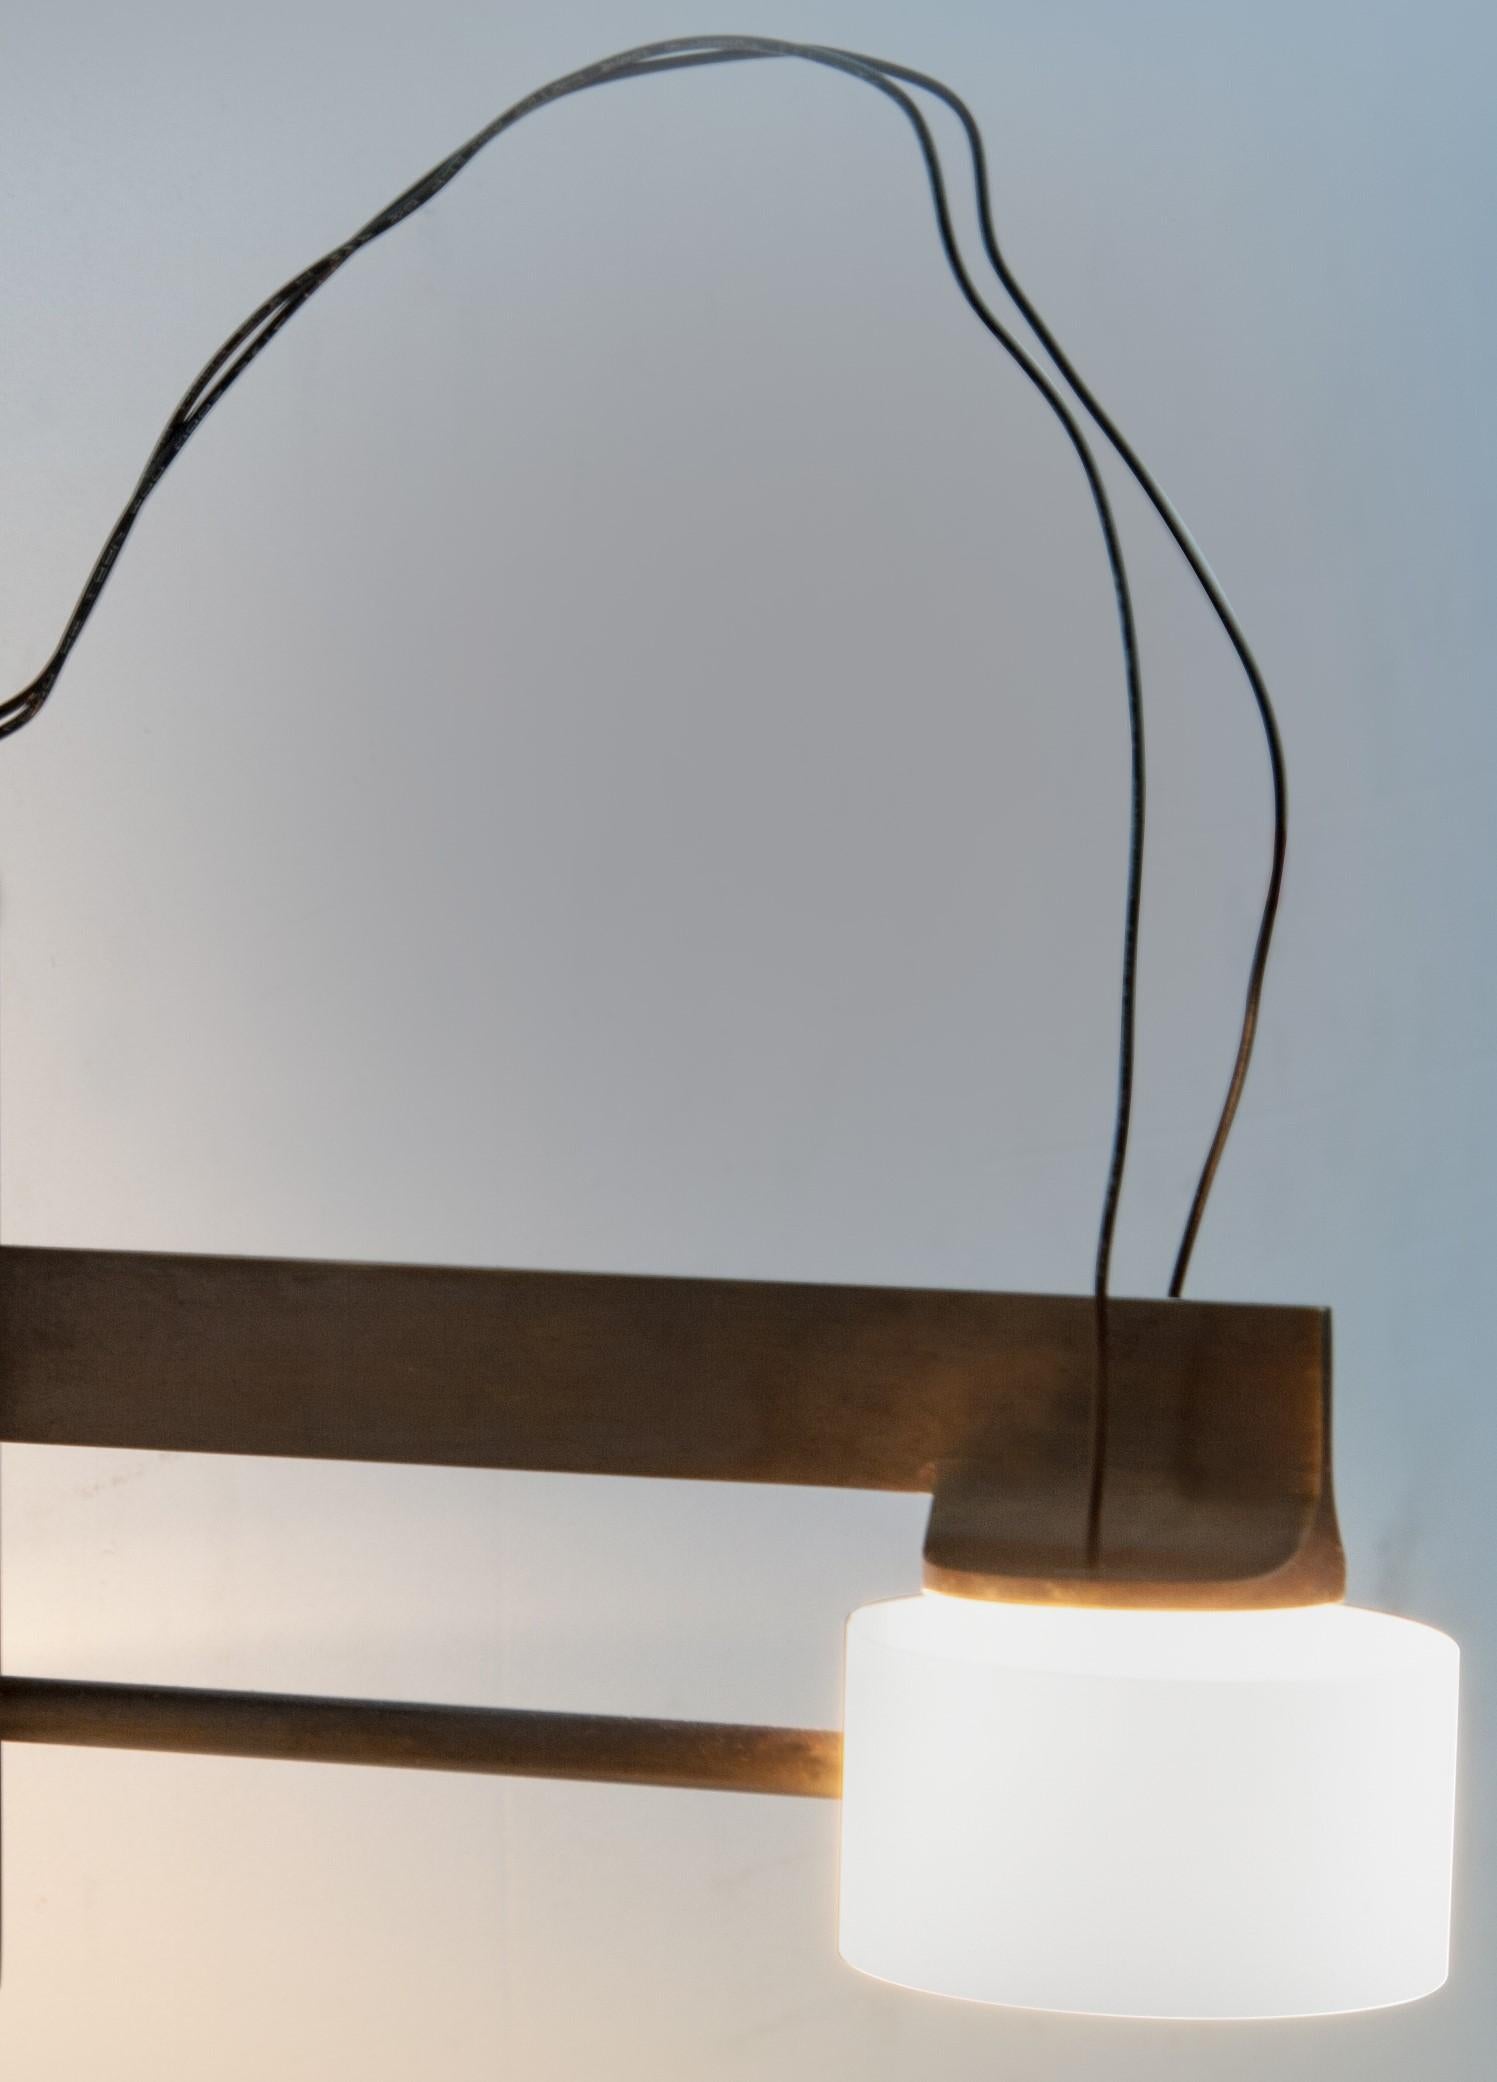 American With Wall Lamp by Gentner Design